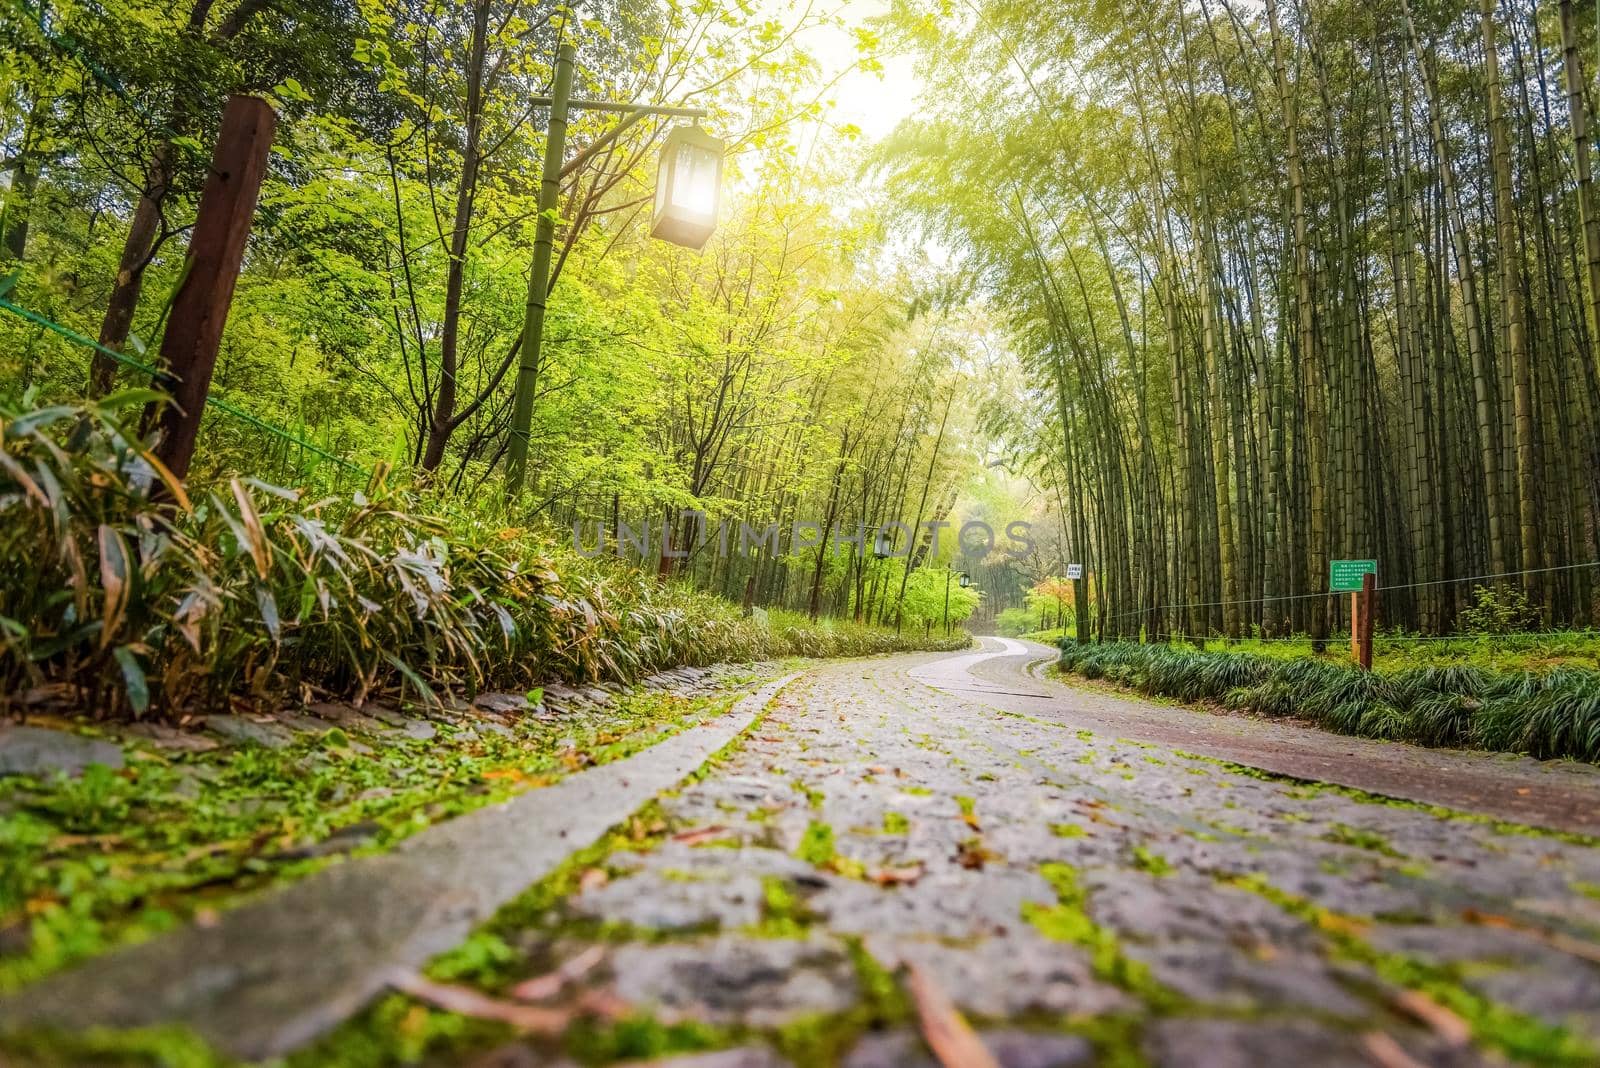 A path in china with bamboo trees, a path in a tourist park in china by isaiphoto